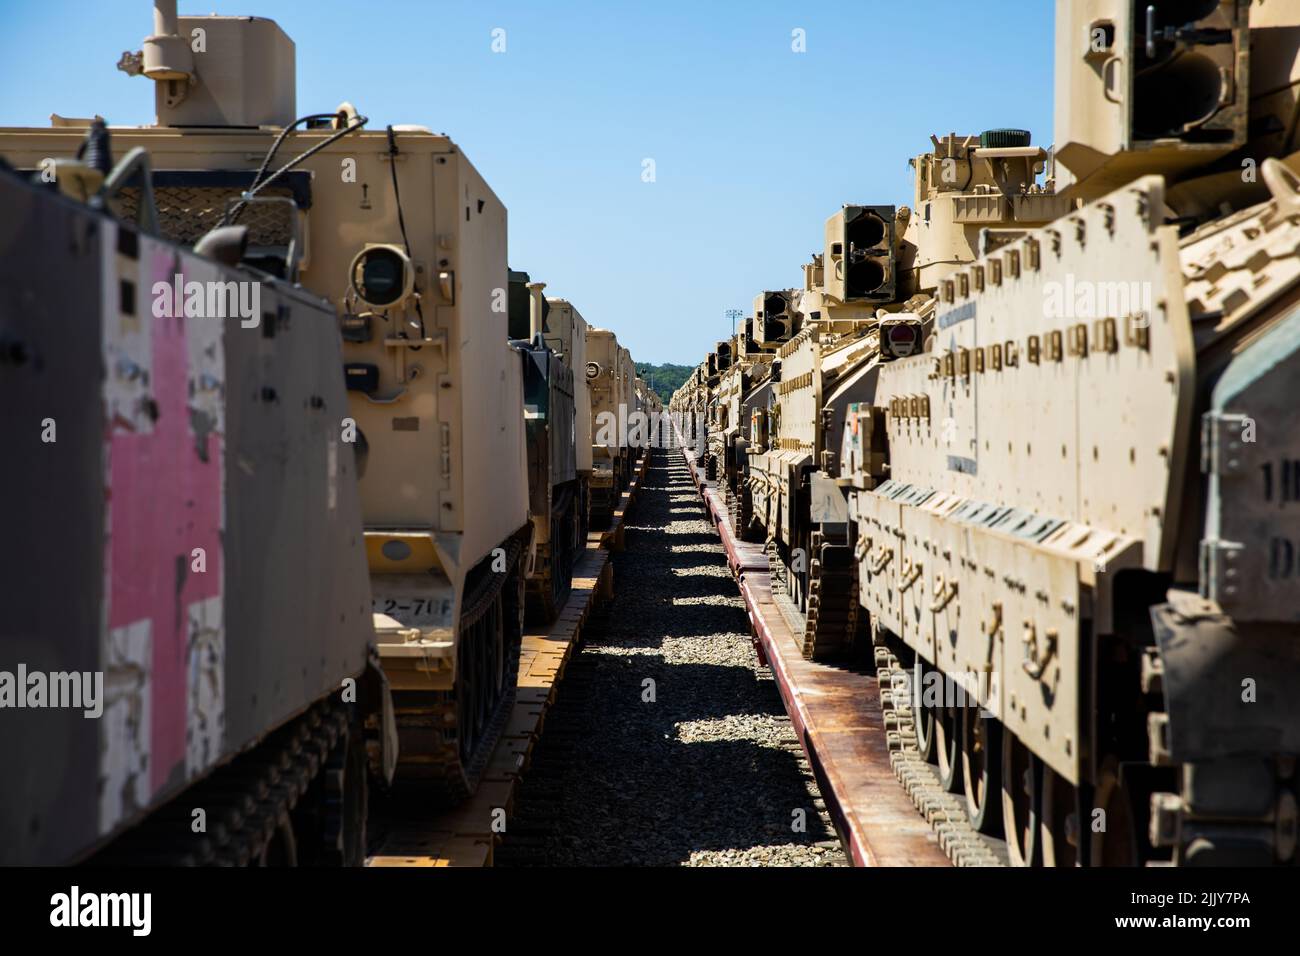 Train cars carrying M2 Bradley Fighting Vehicles alongside High Mobility Multipurpose Wheeled Vehicle’s (HMMWV’s) and an M113 Armored Personnel Carrier are staged prior to transportation to the National Training Center at, Fort Irwin, California, July 24, 2022. All vehicles are staged and inspected several times before being cleared for transportation. (U.S. Army Photo by Pfc. Kenneth Barnet) Stock Photo